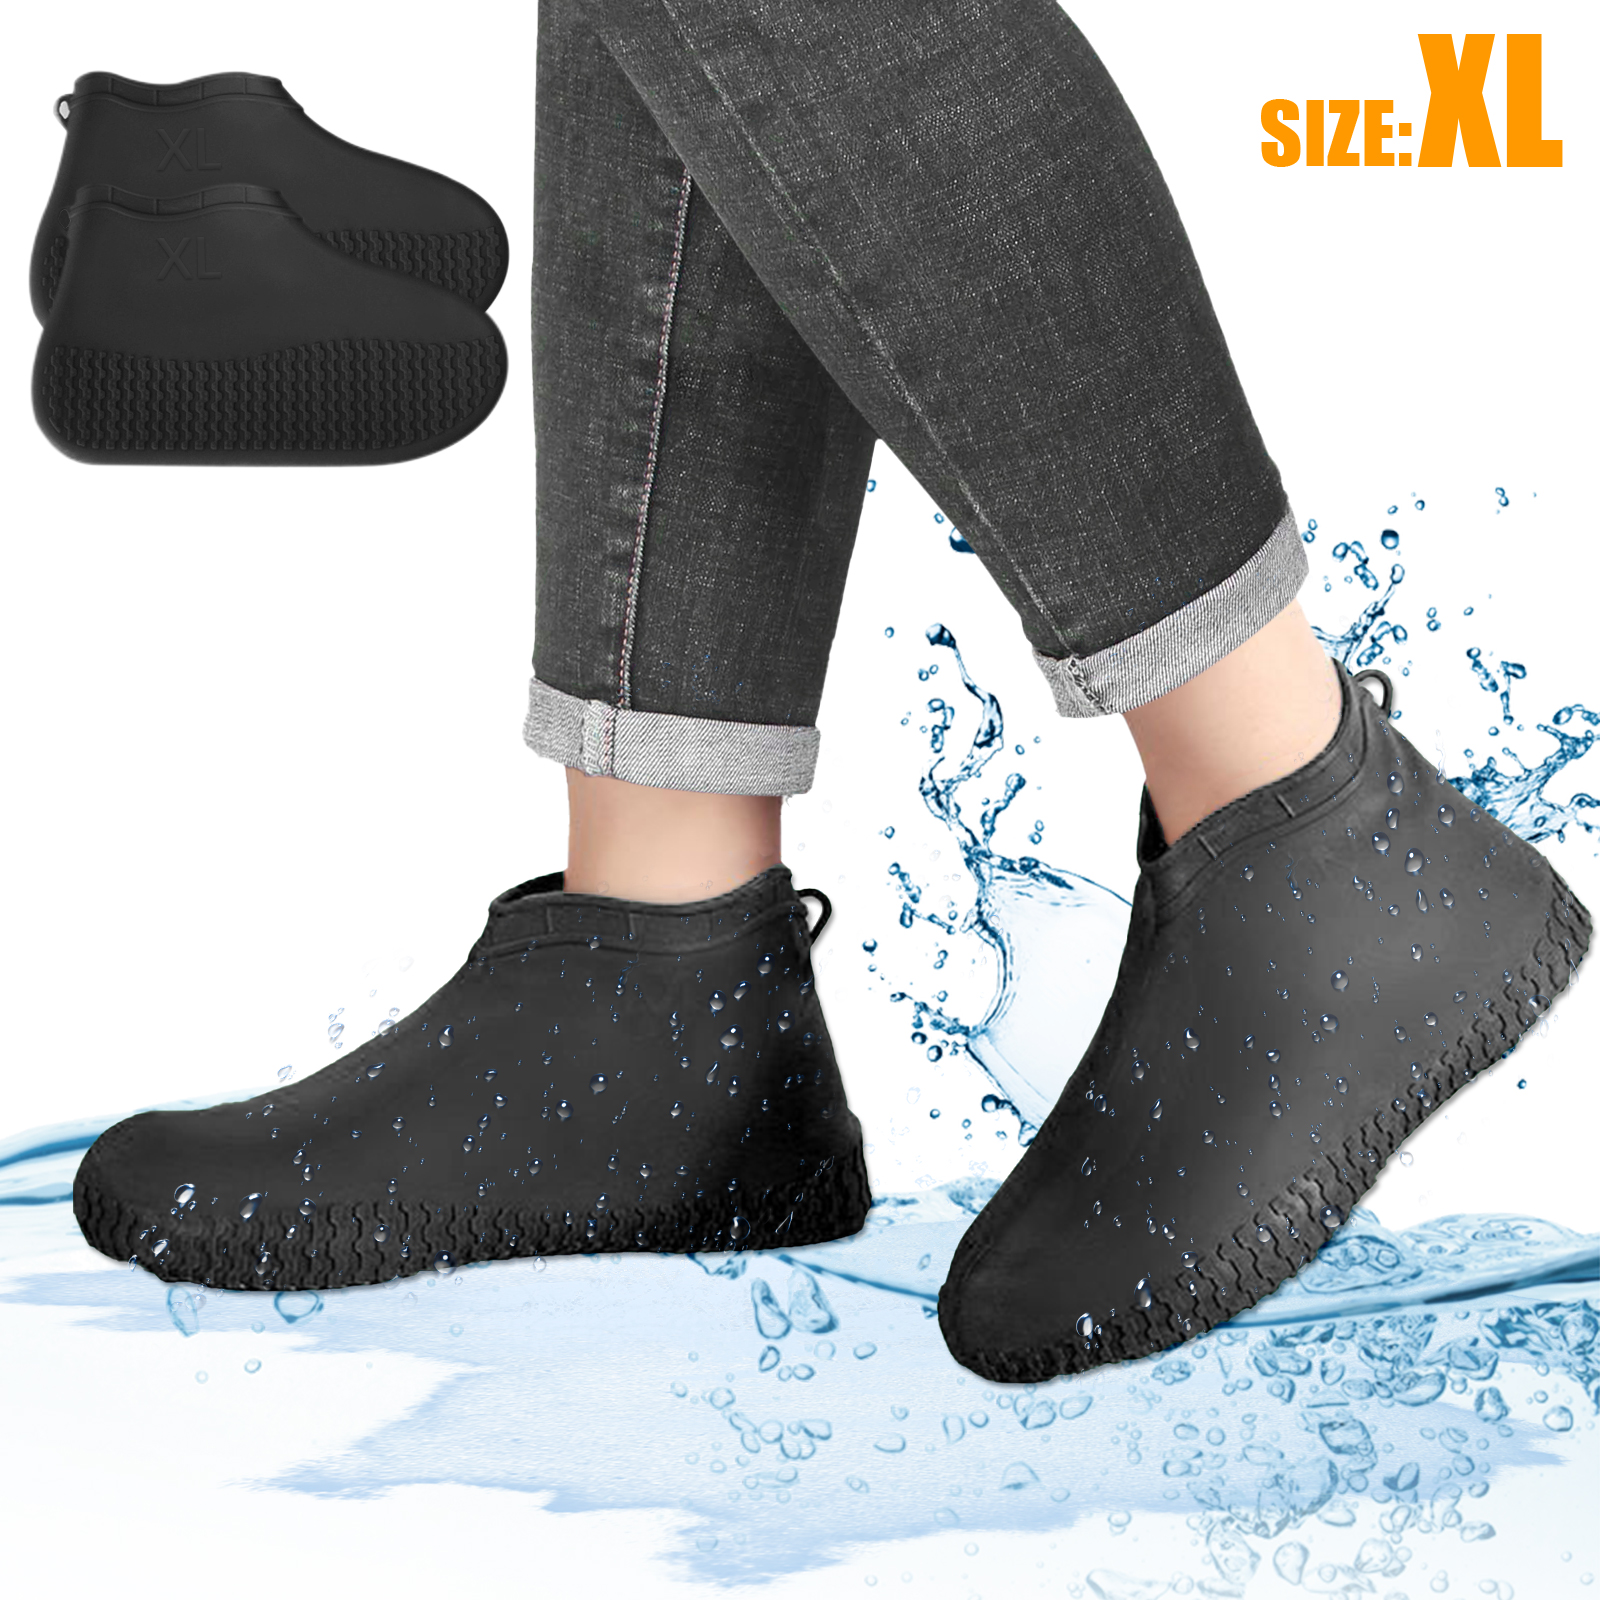 Waterproof Recyclable Silicone Overshoes Rain Shoe Cover Boot  Protector UK 